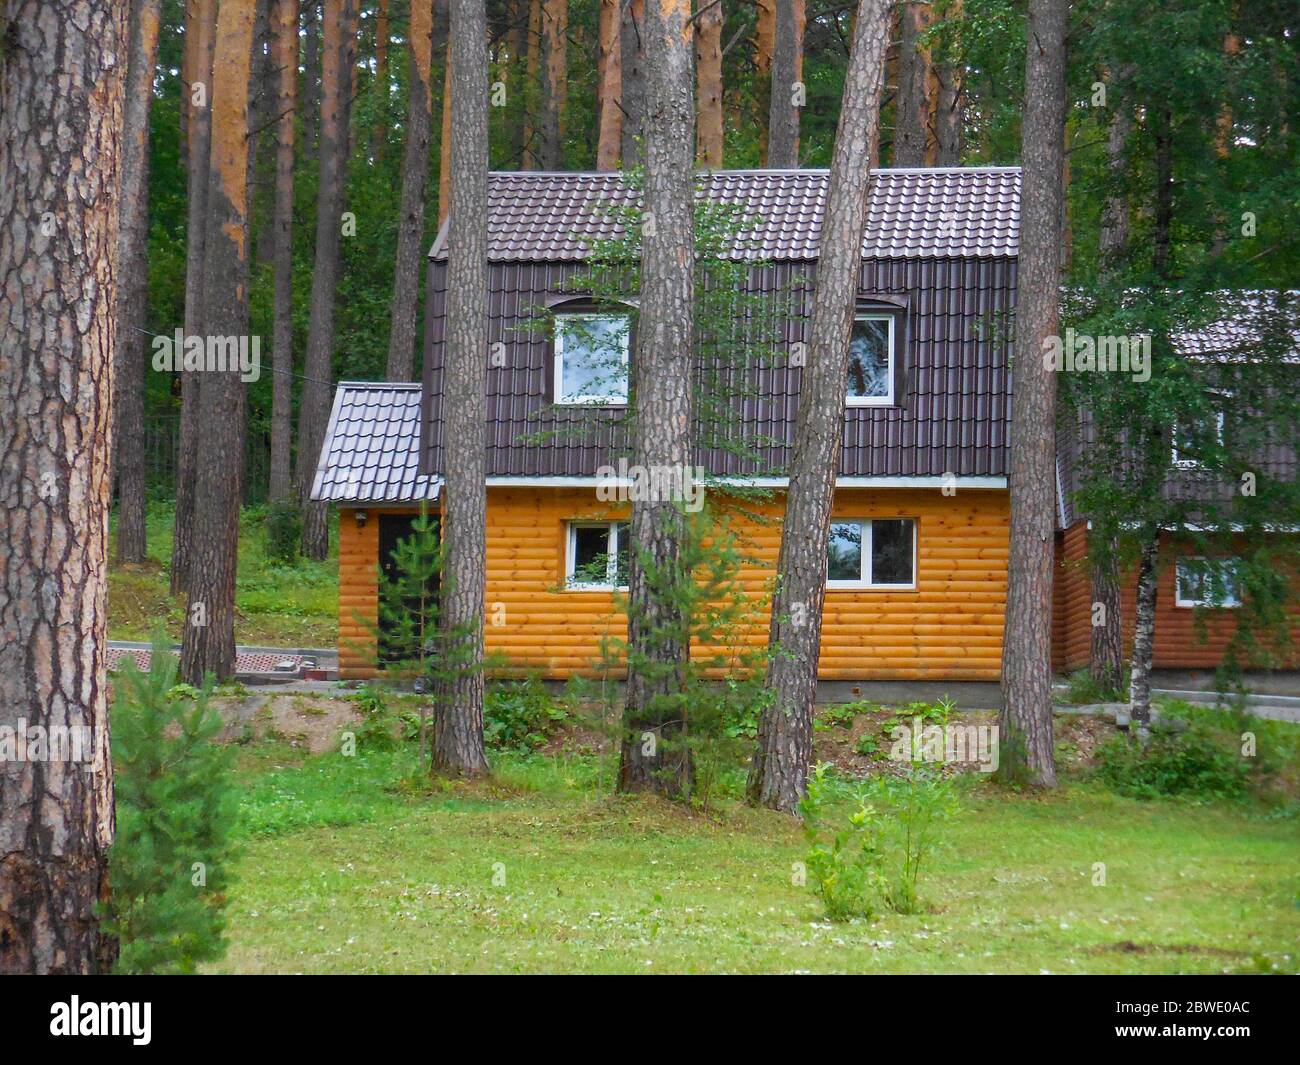 chelyabinsk, russia 06 06 2019: Russian wooden house in the trunk of trees in nature. Wooden house among the pine trees. Stock Photo